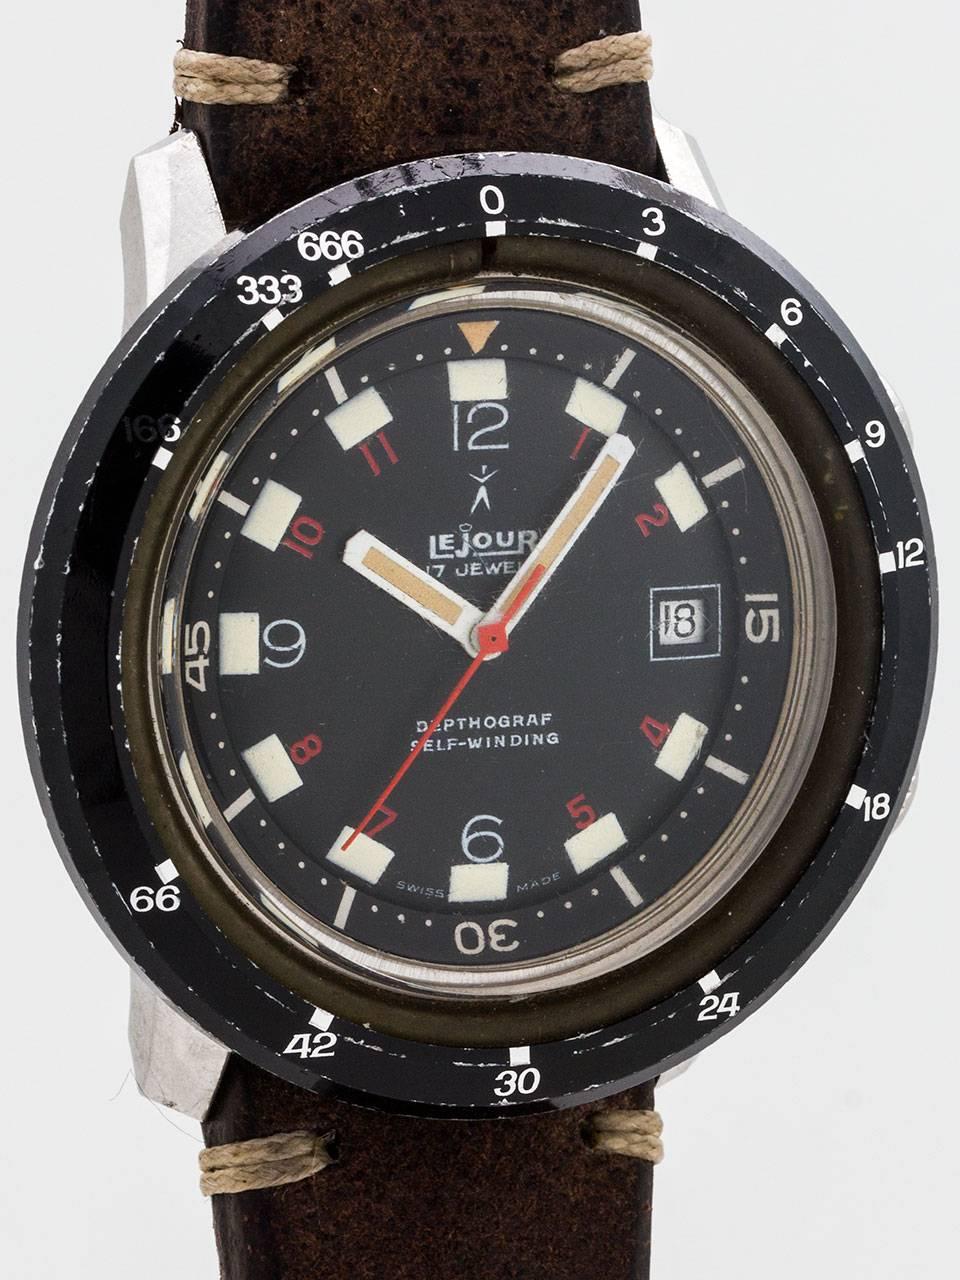 Le Jour Depthograf Diver’s Wristwatch circa 1960s. This watch features an extra large 45mm in diameter and 14mm thick stainless steel case. Lug to lug measurement is 46mm. Featuring a with black painted bezel and screw down case back. Original